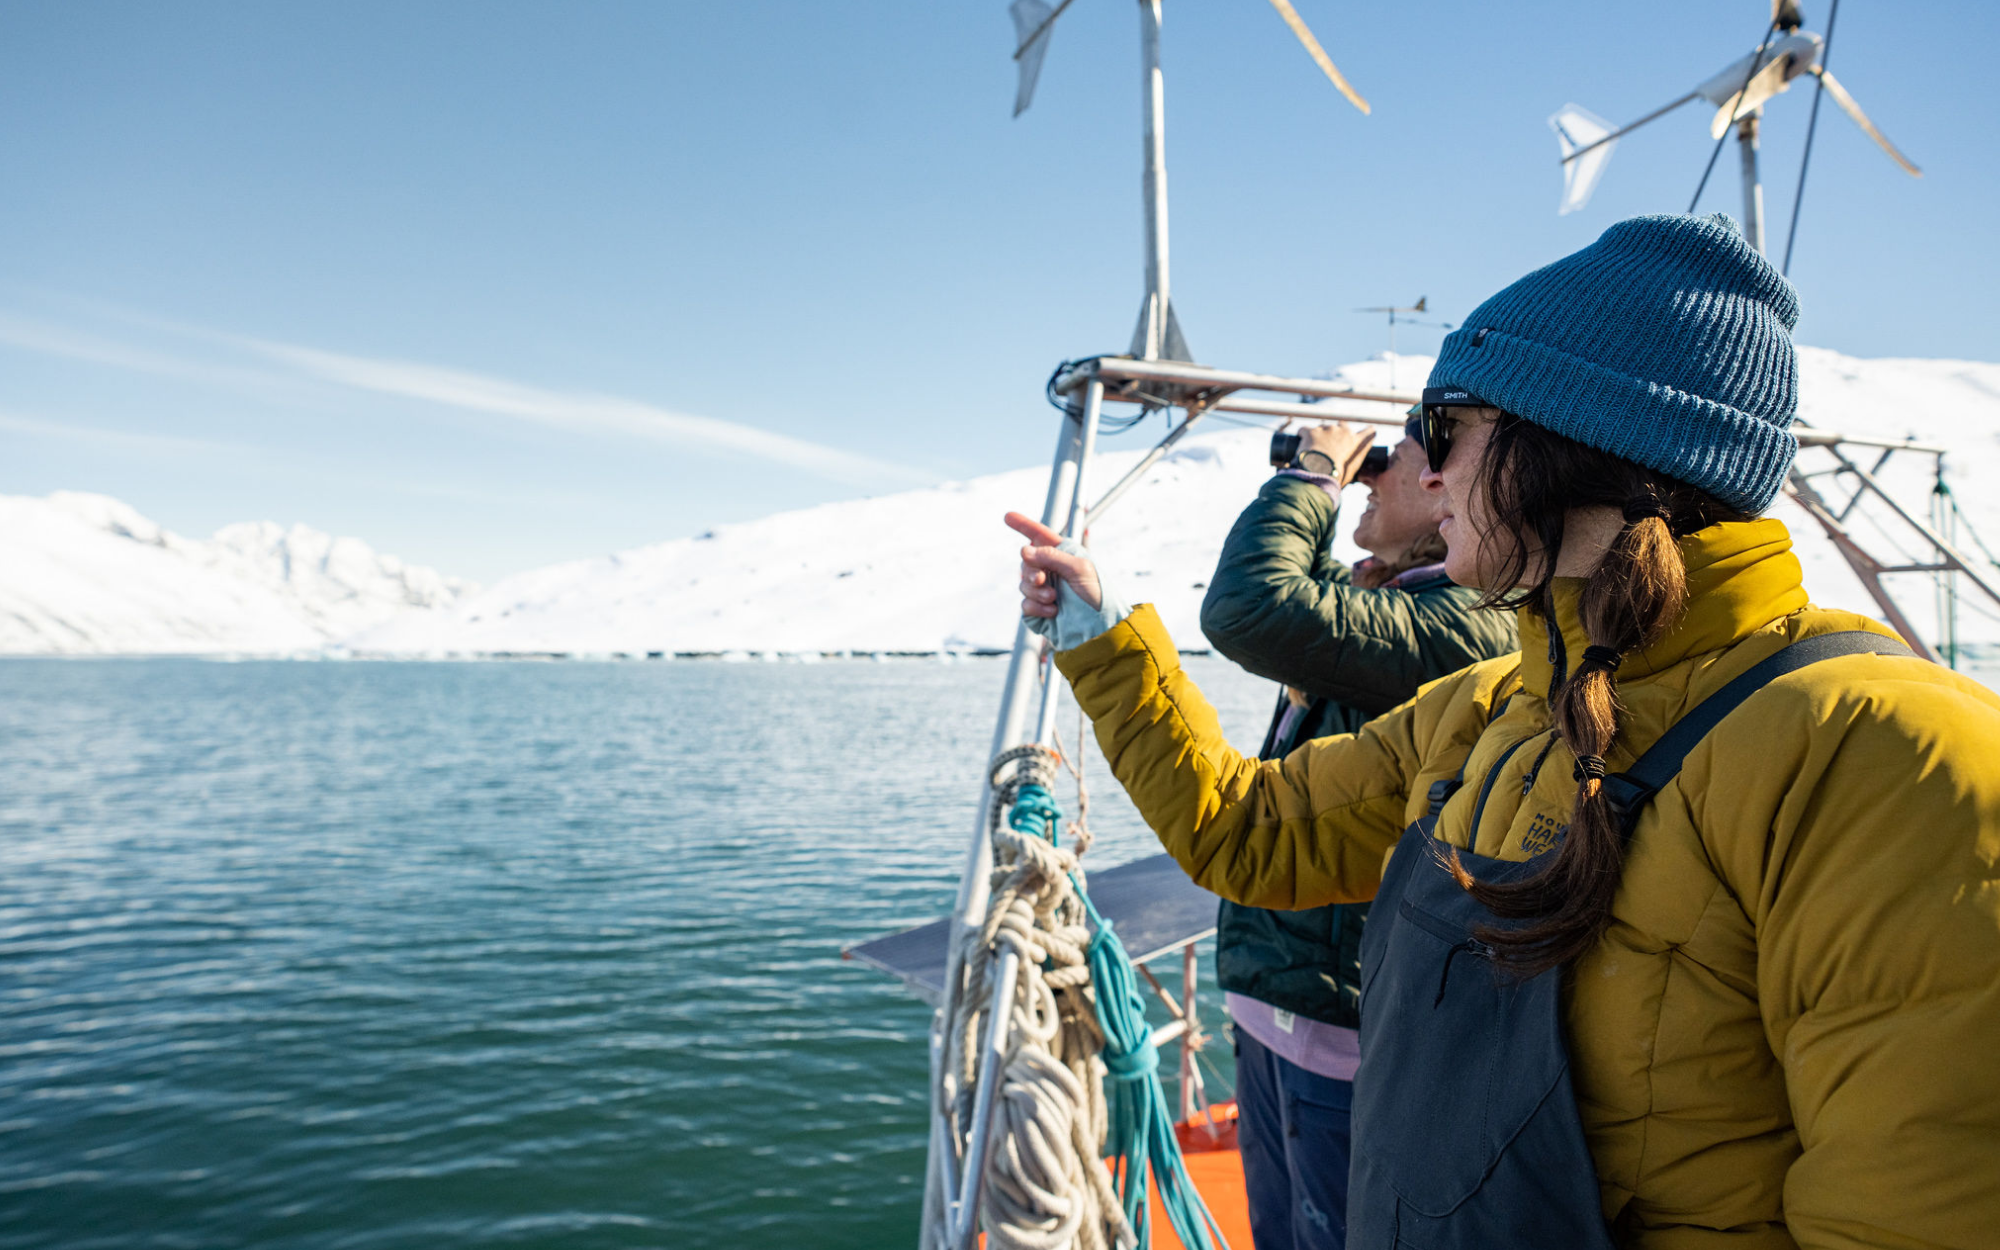 Profile shot of Rachael wearing a Stretchdown jacket and bib on the sailboat, looking out.